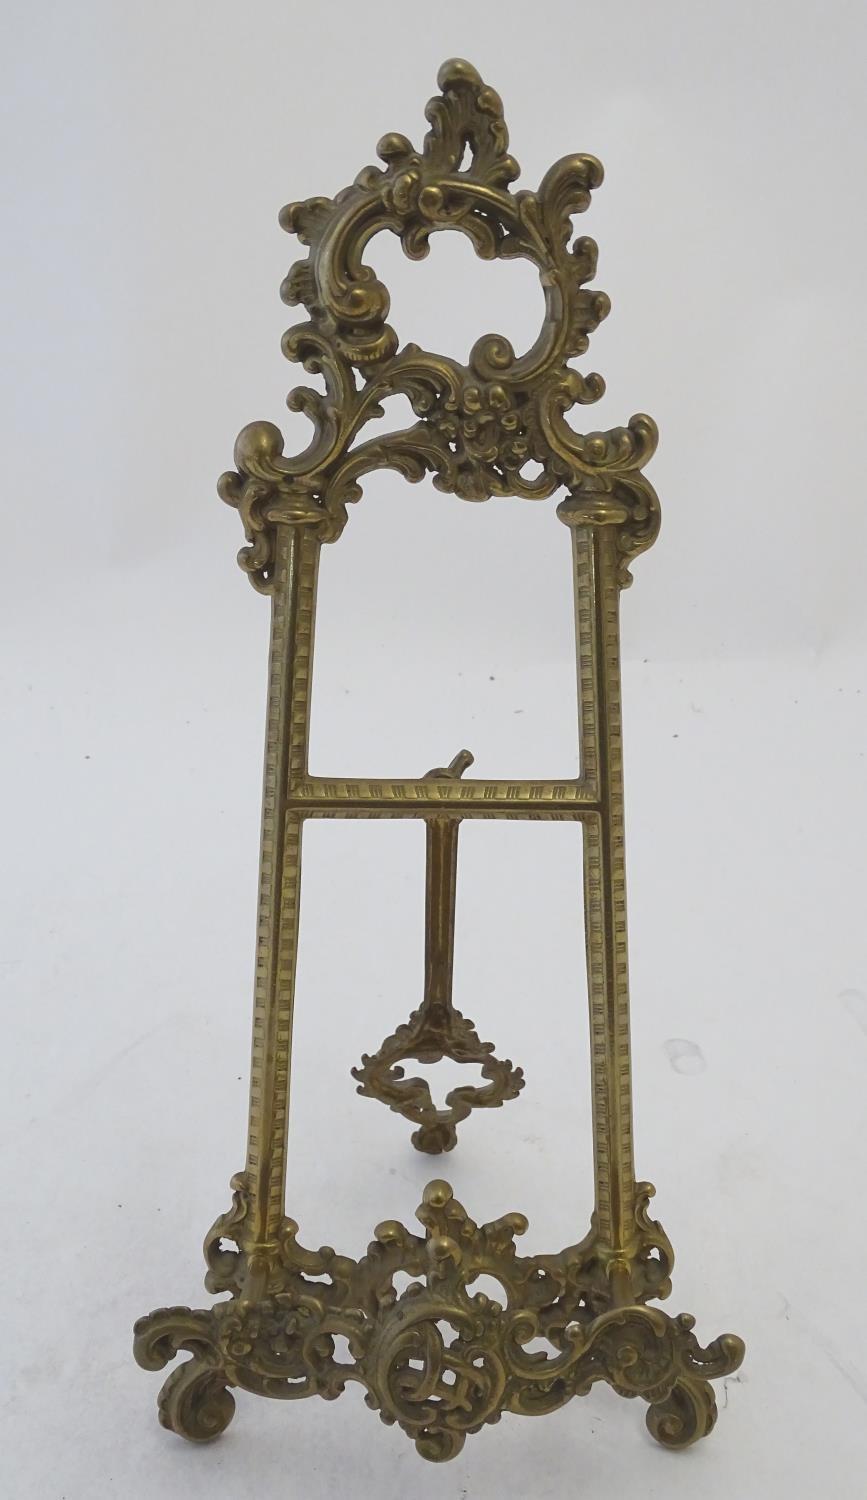 A 20thC cast brass table top easel with scrolling foliate decoration. Approx. 15 1/2" high Please